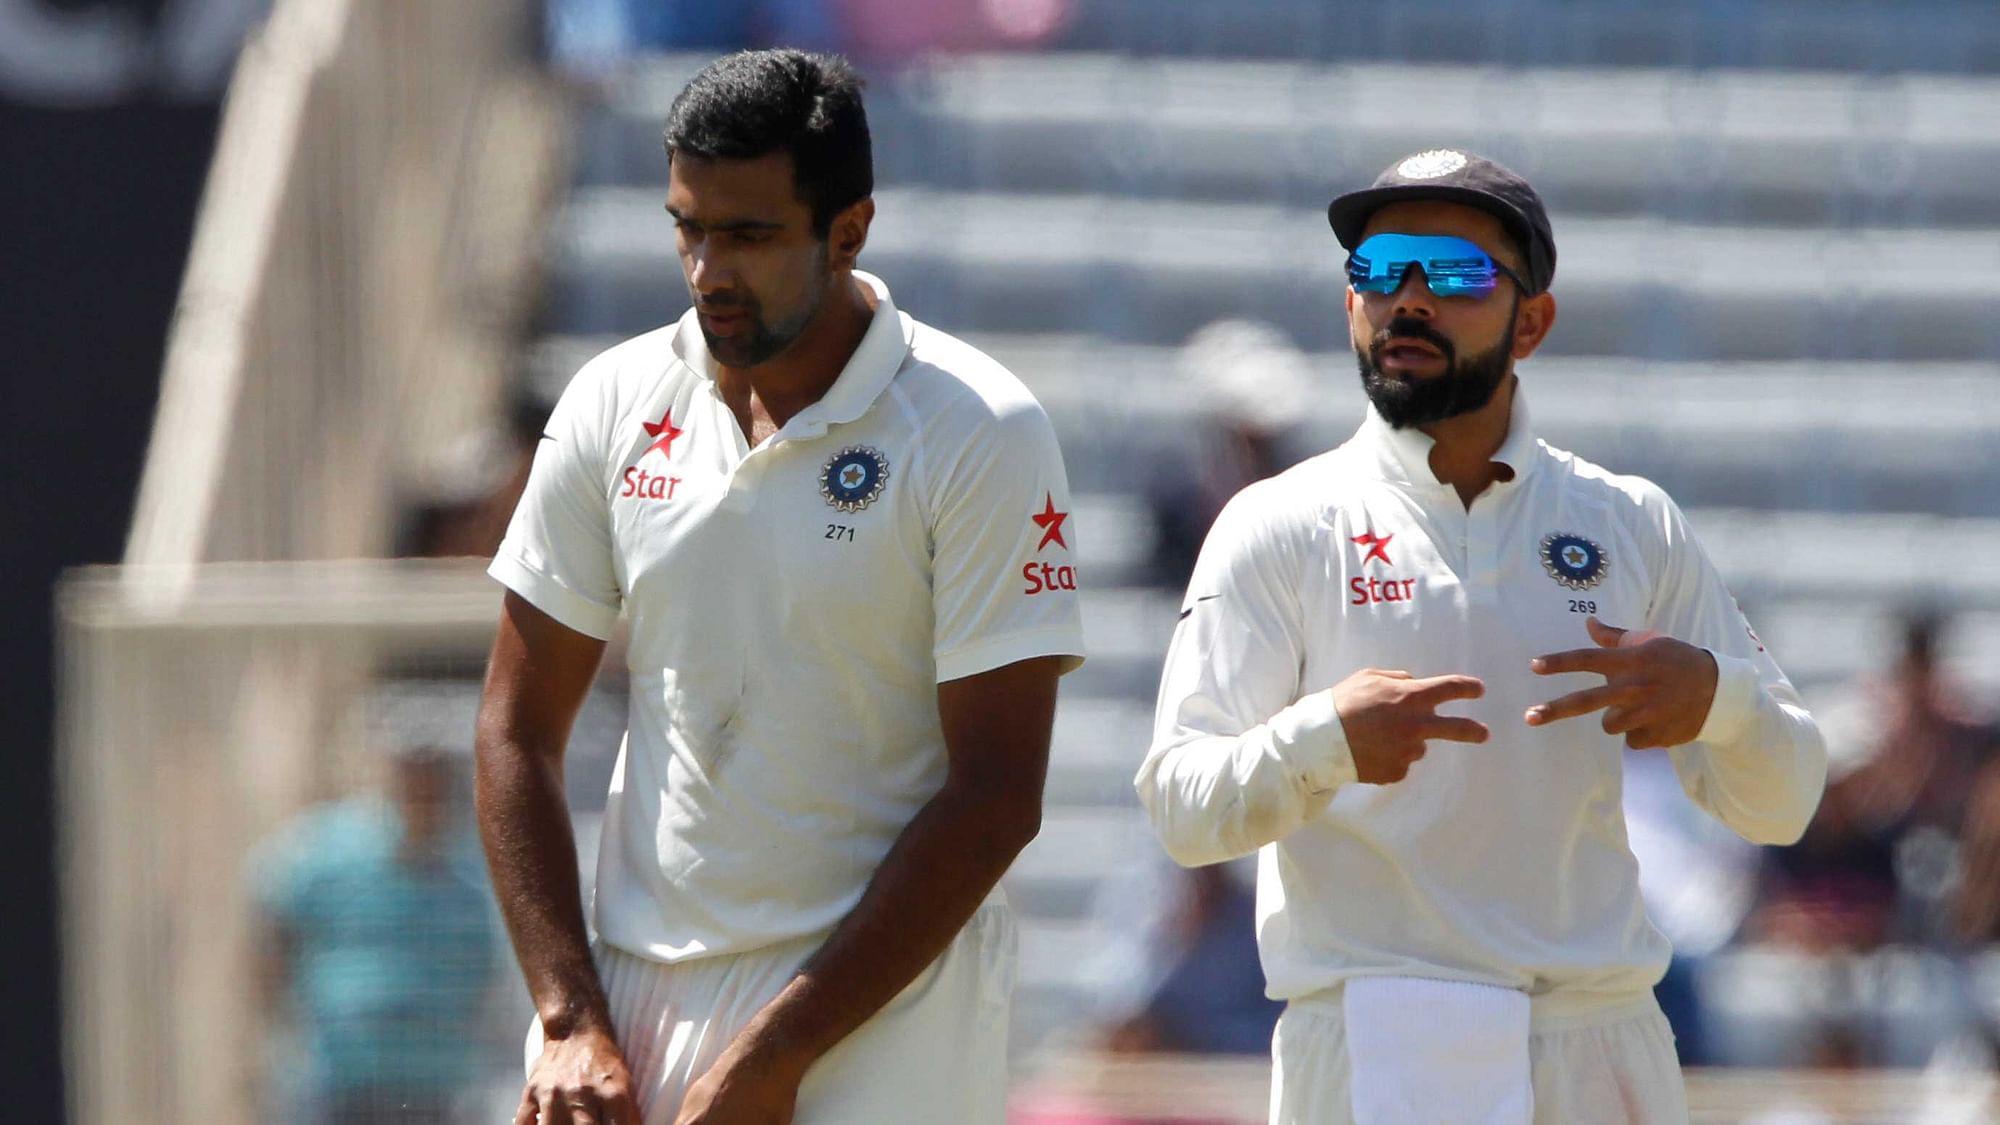 Ravi Ashwin took a dig at Brad Hodge who had questioned Virat’s commitment to the Indian team earlier this week. (Photo: BCCI)